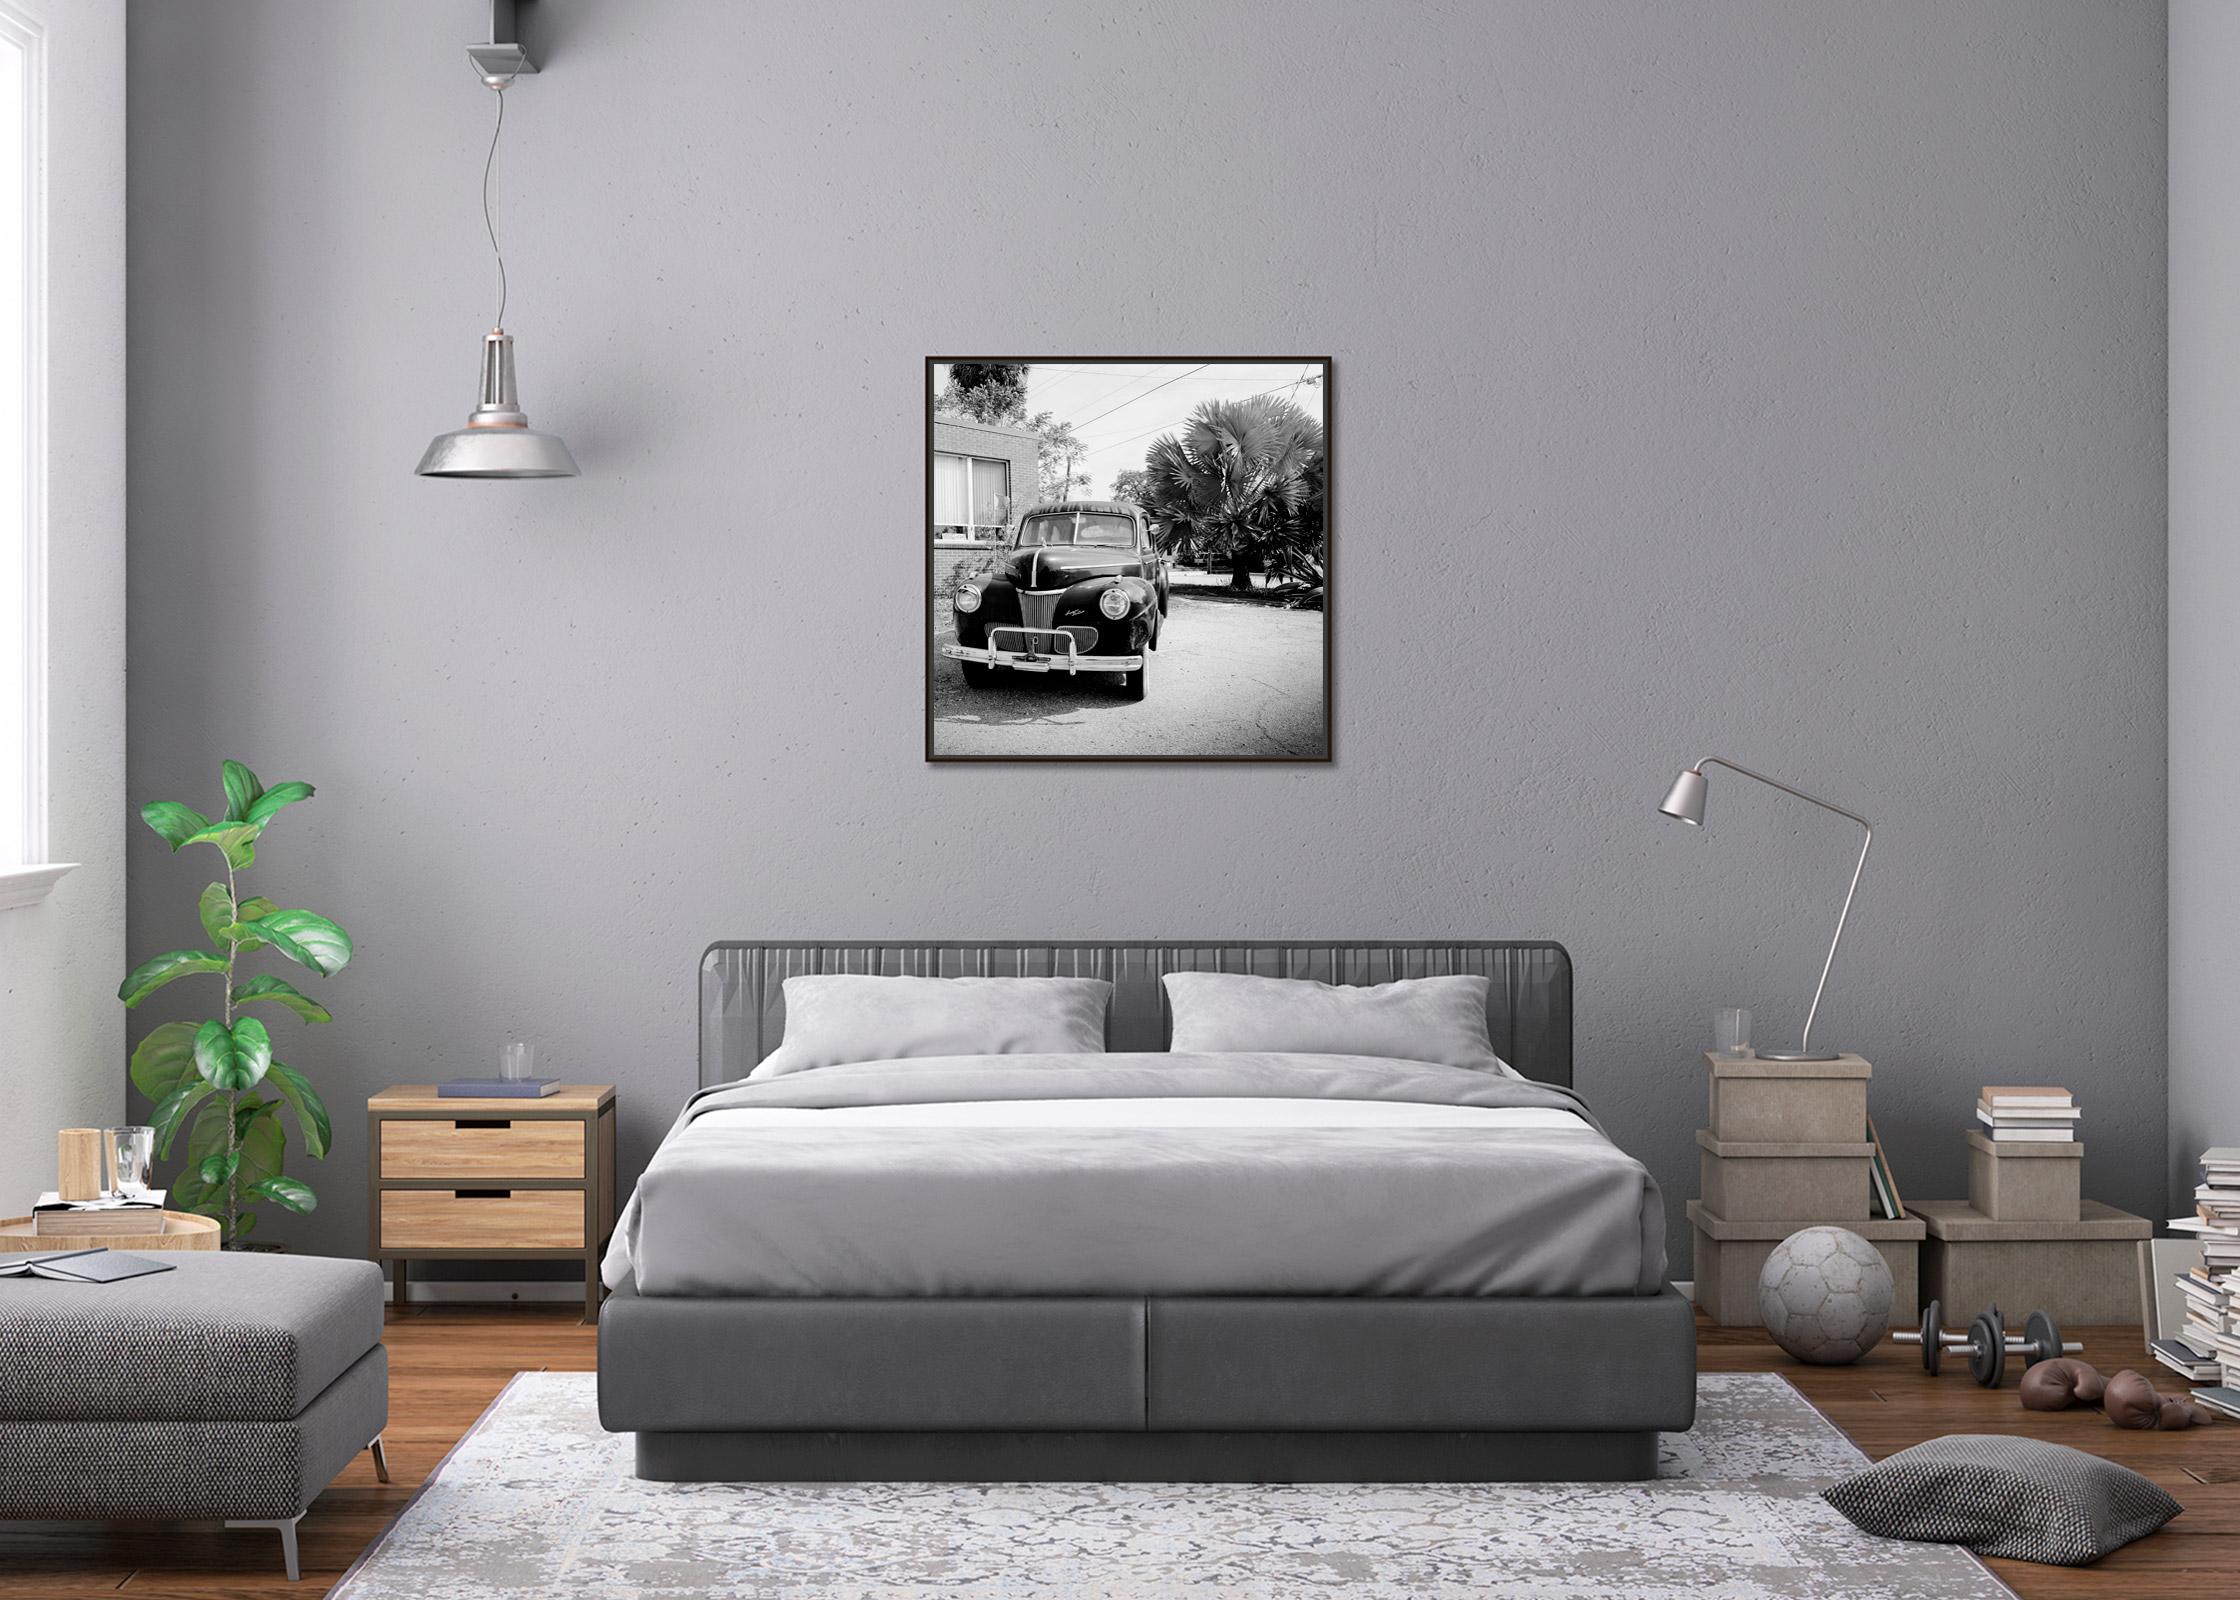 1941 Ford Super Deluxe Business Coupe, USA, black & white photography, landscape - Minimalist Photograph by Gerald Berghammer